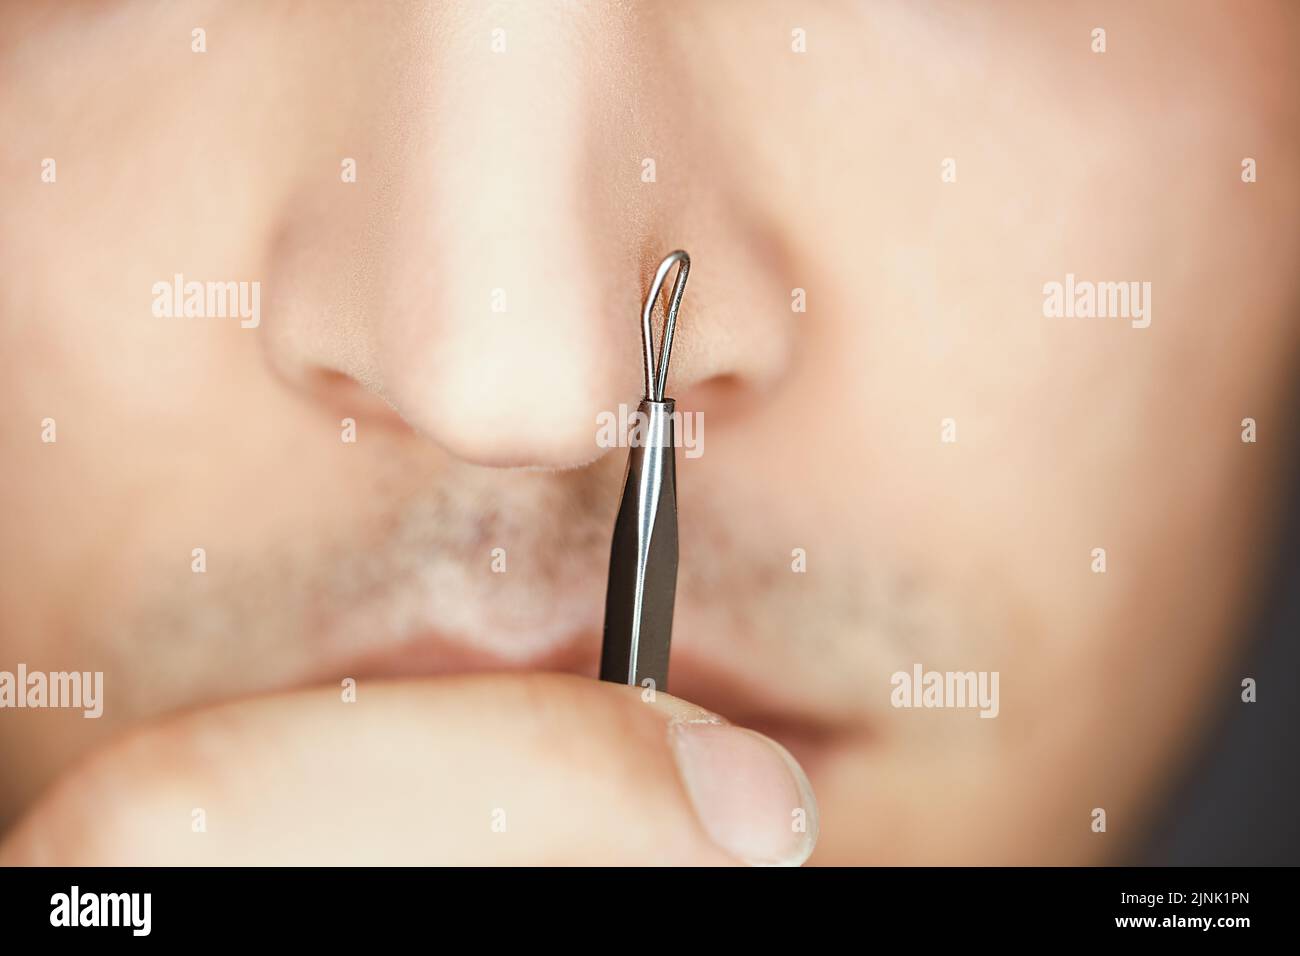 A pimple remover on male skin to care and clean pores and get blackheads out of nose Stock Photo